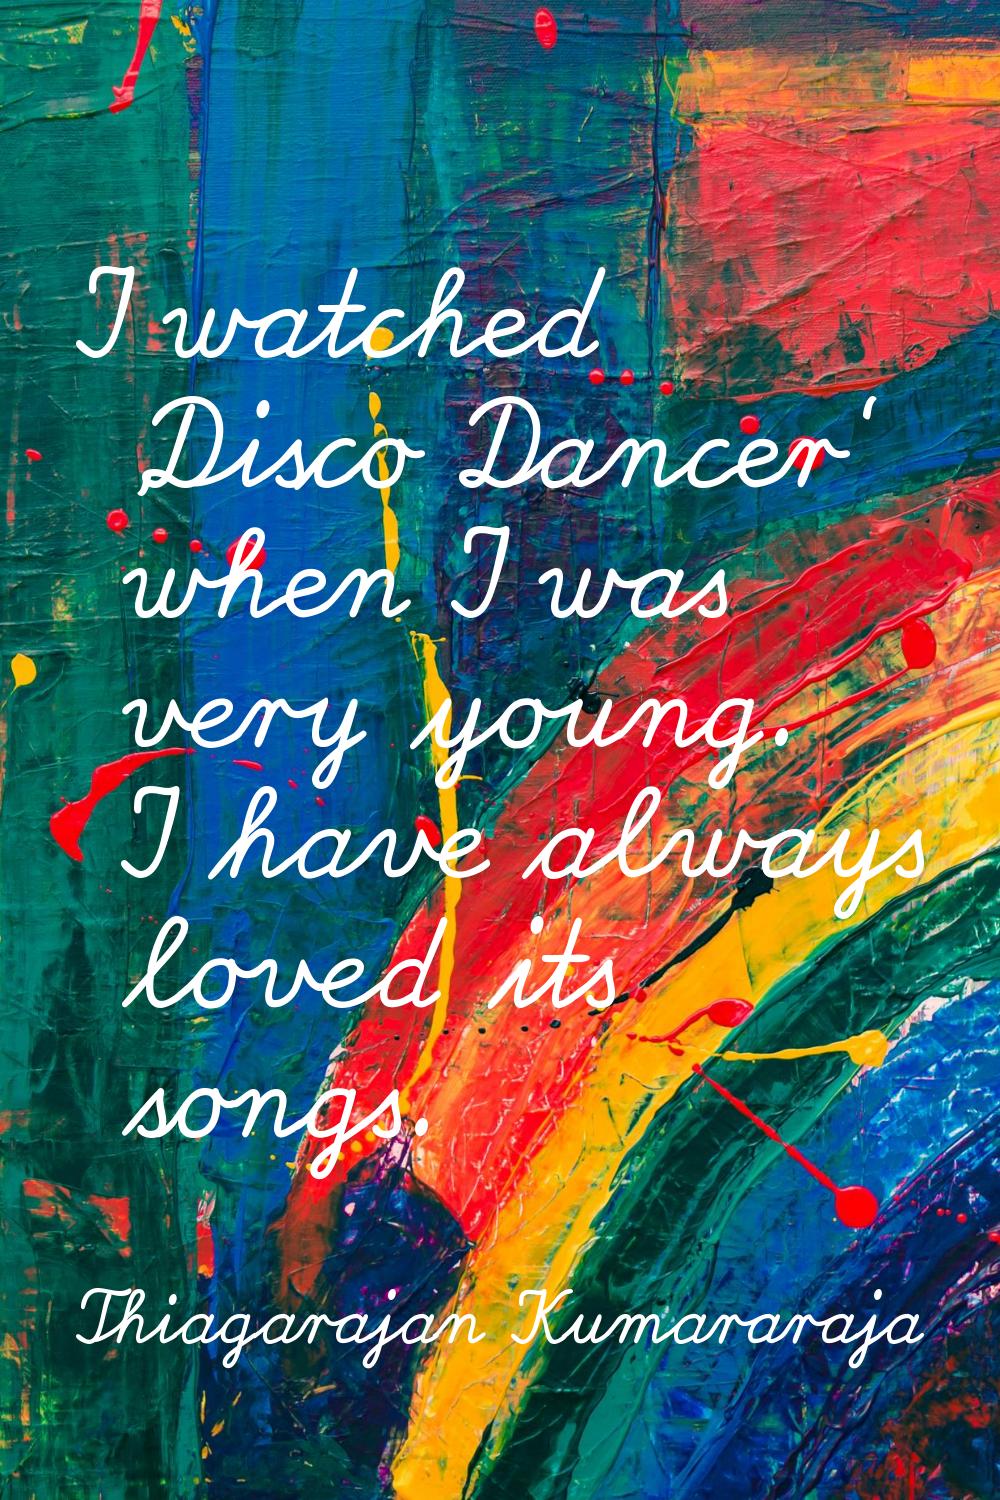 I watched 'Disco Dancer' when I was very young. I have always loved its songs.